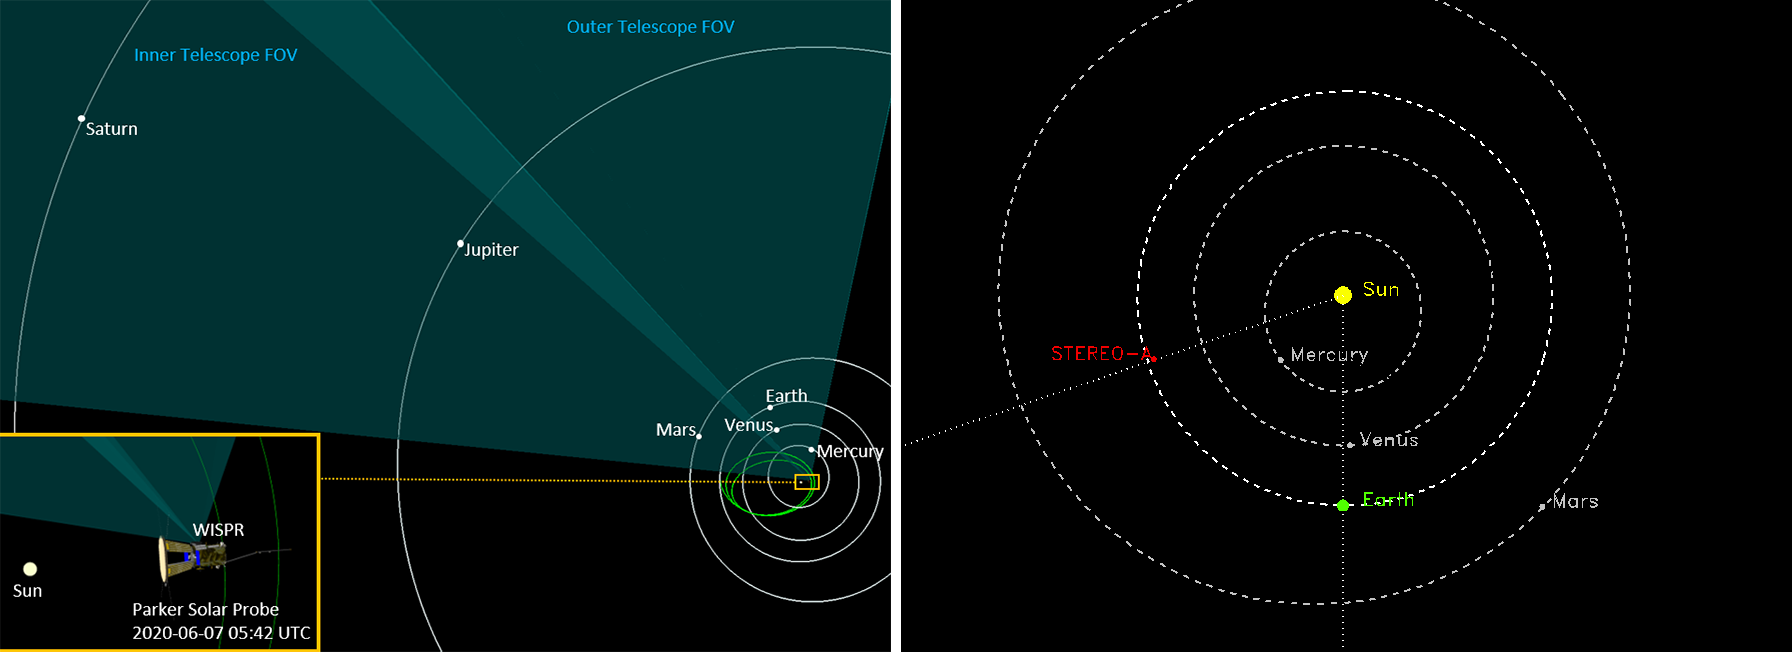 Two diagrams illustrating the positions of Parker Solar Probe and STEREO in space on June 7, 2020